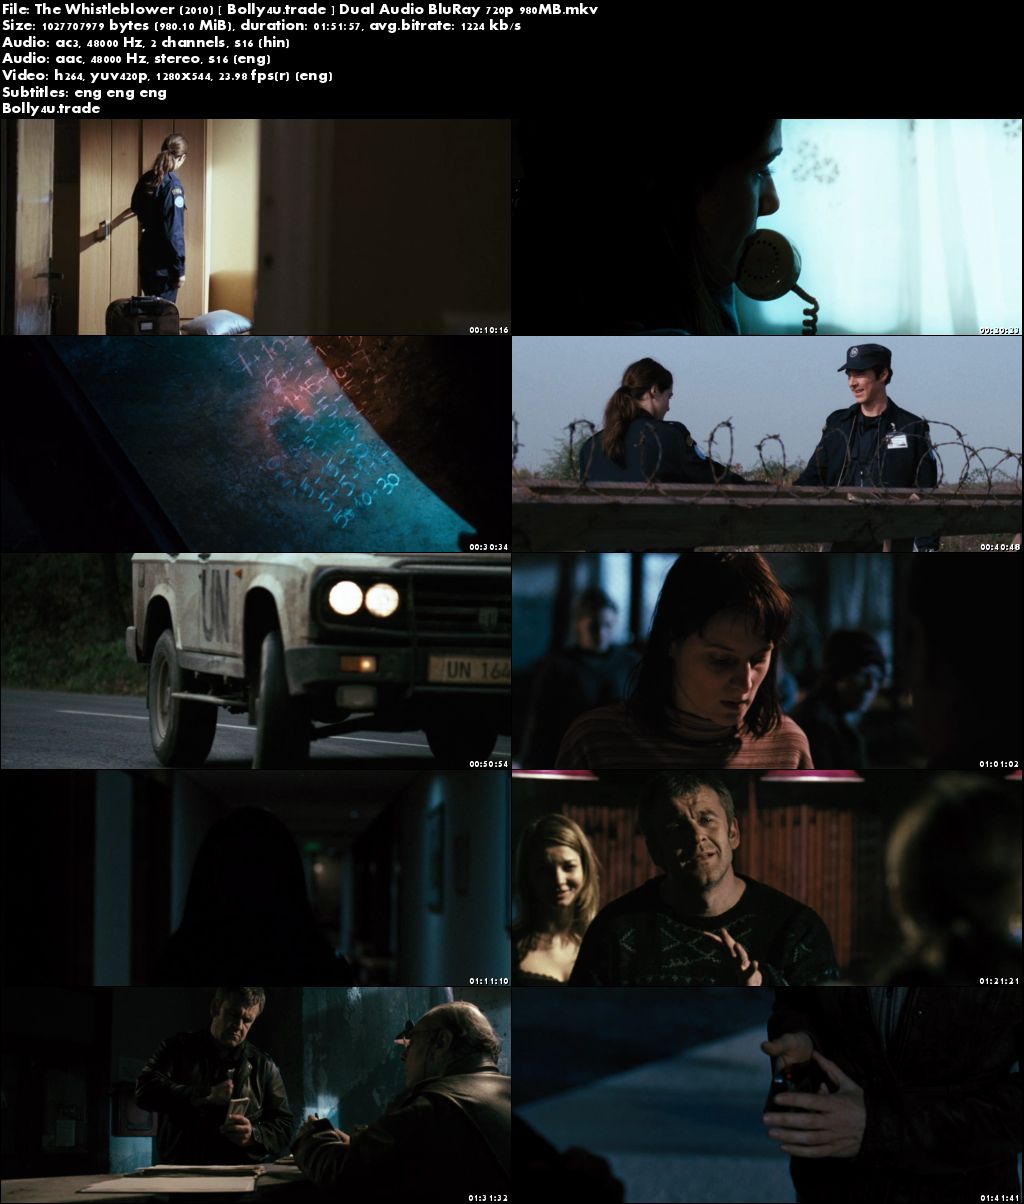 The Whistleblower 2010 BluRay 950MB Hindi Dubbed Dual Audio 720p Download